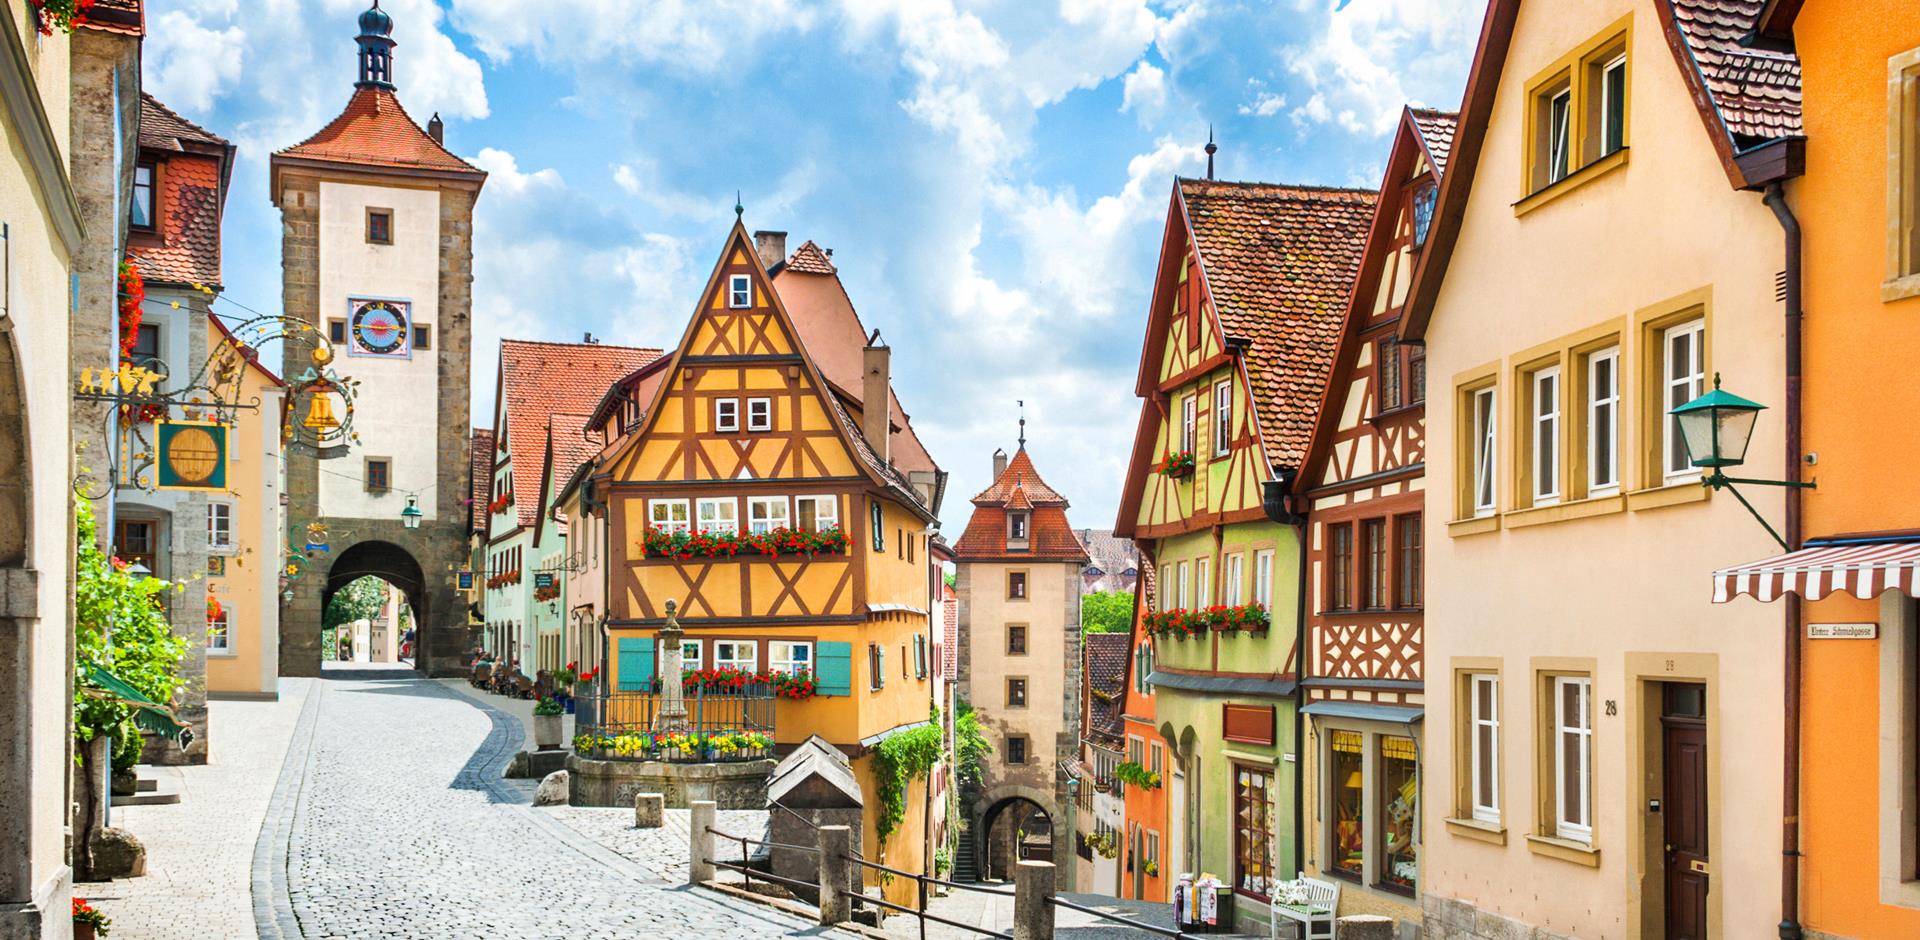 The historic town of Rothenburg, Germany.